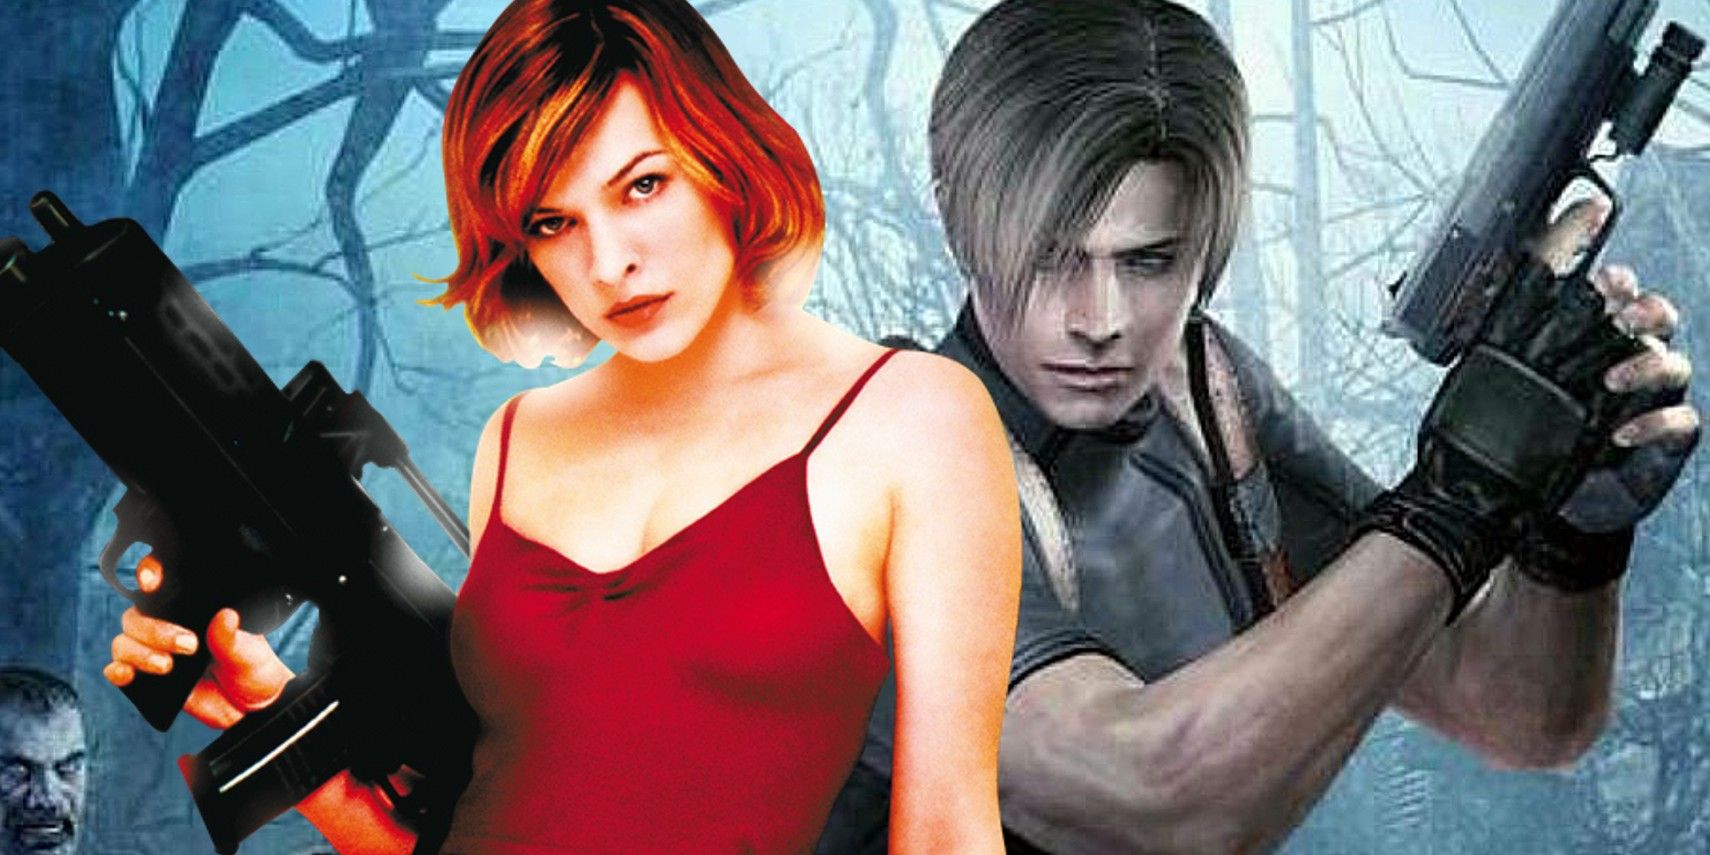 Alice from the Resident Evil movies to the right and Leon S. Kennedy from RE: 4 on the left.